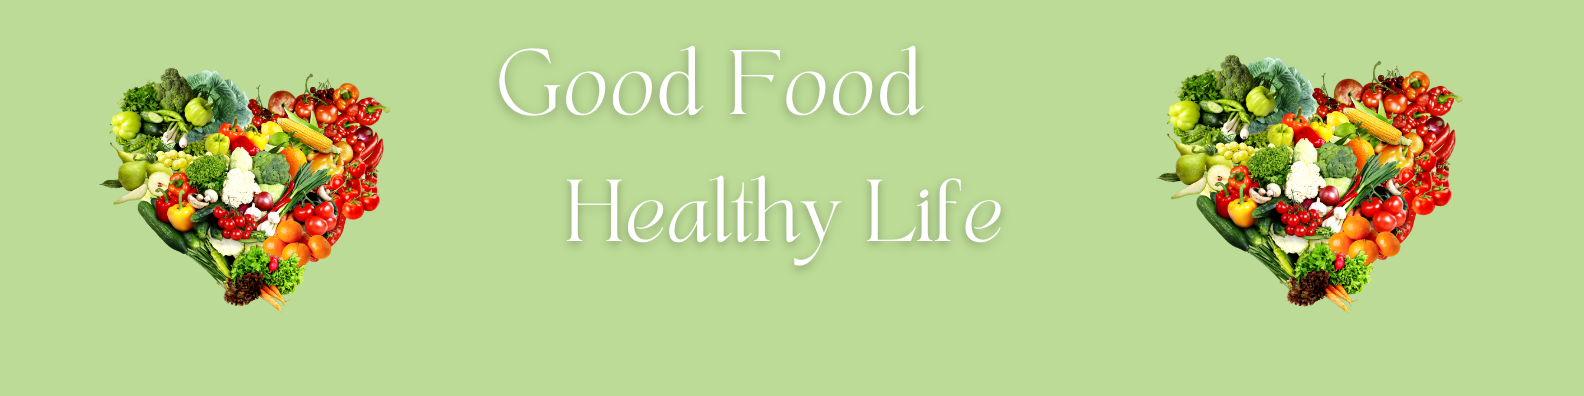 The Good Food and Health